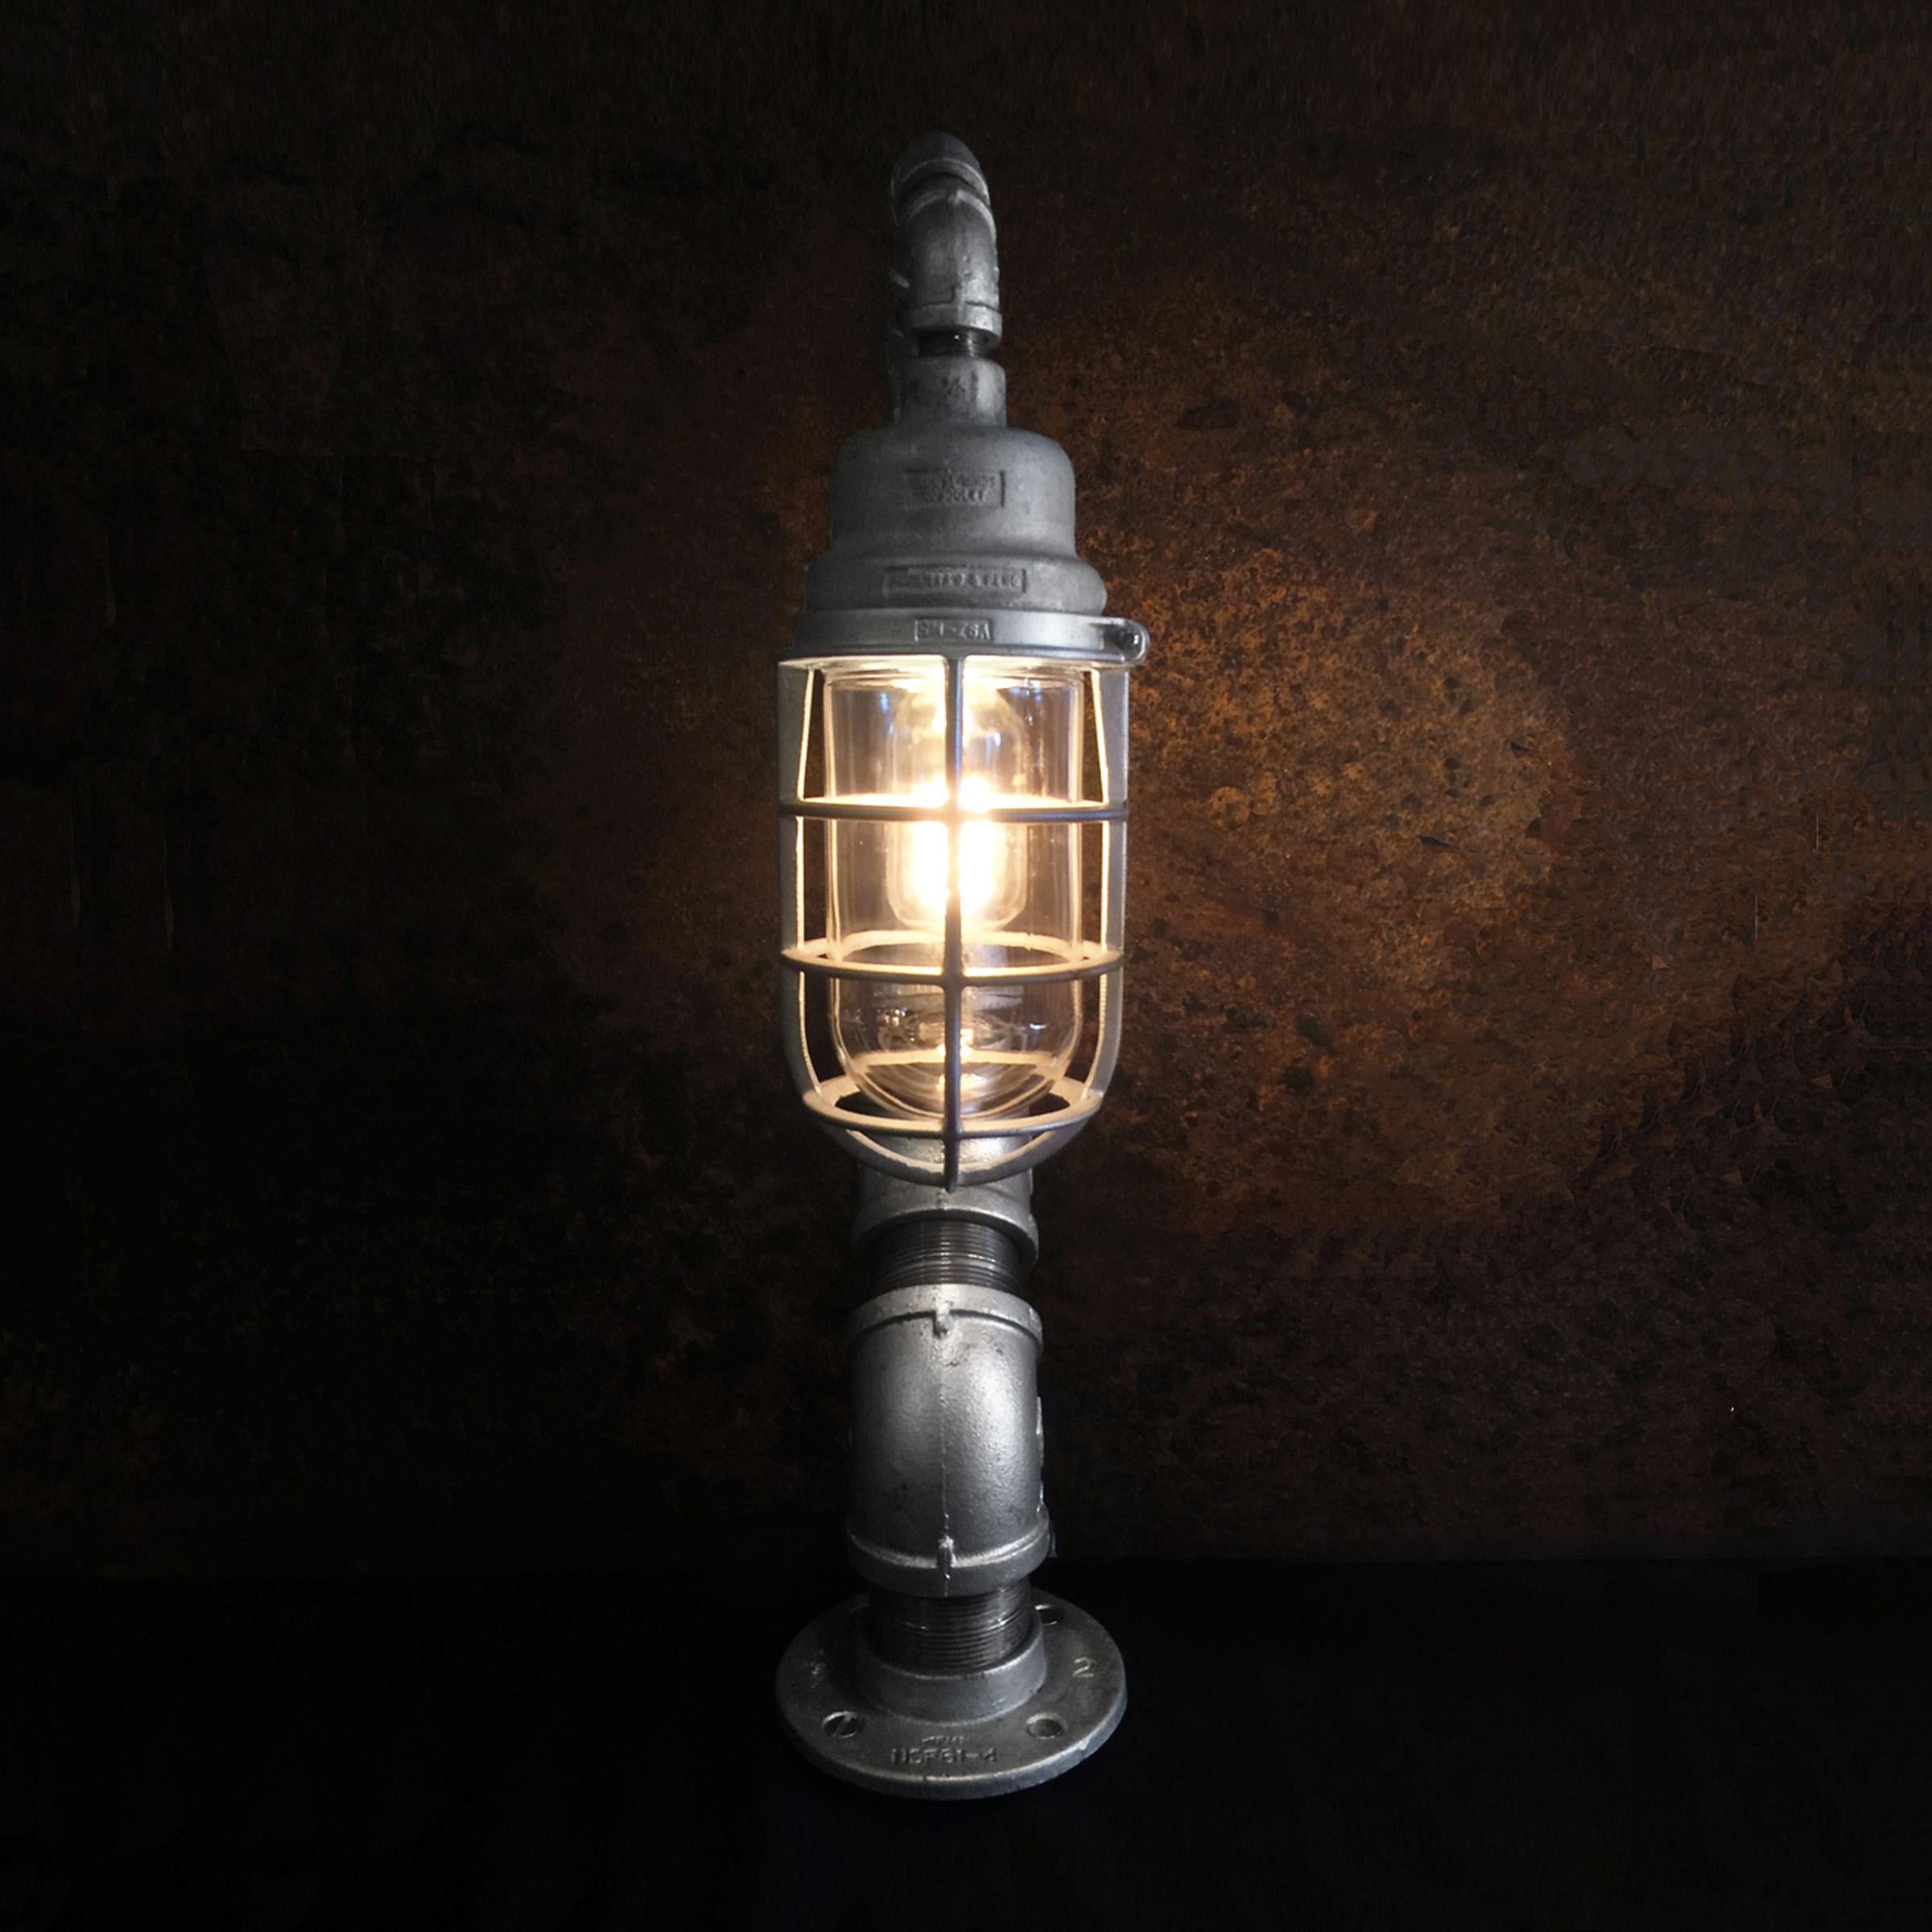 Polished Modern Industrial Table Lamp - Industrial Decor - Crouse Hinds Industrial Light For Sale